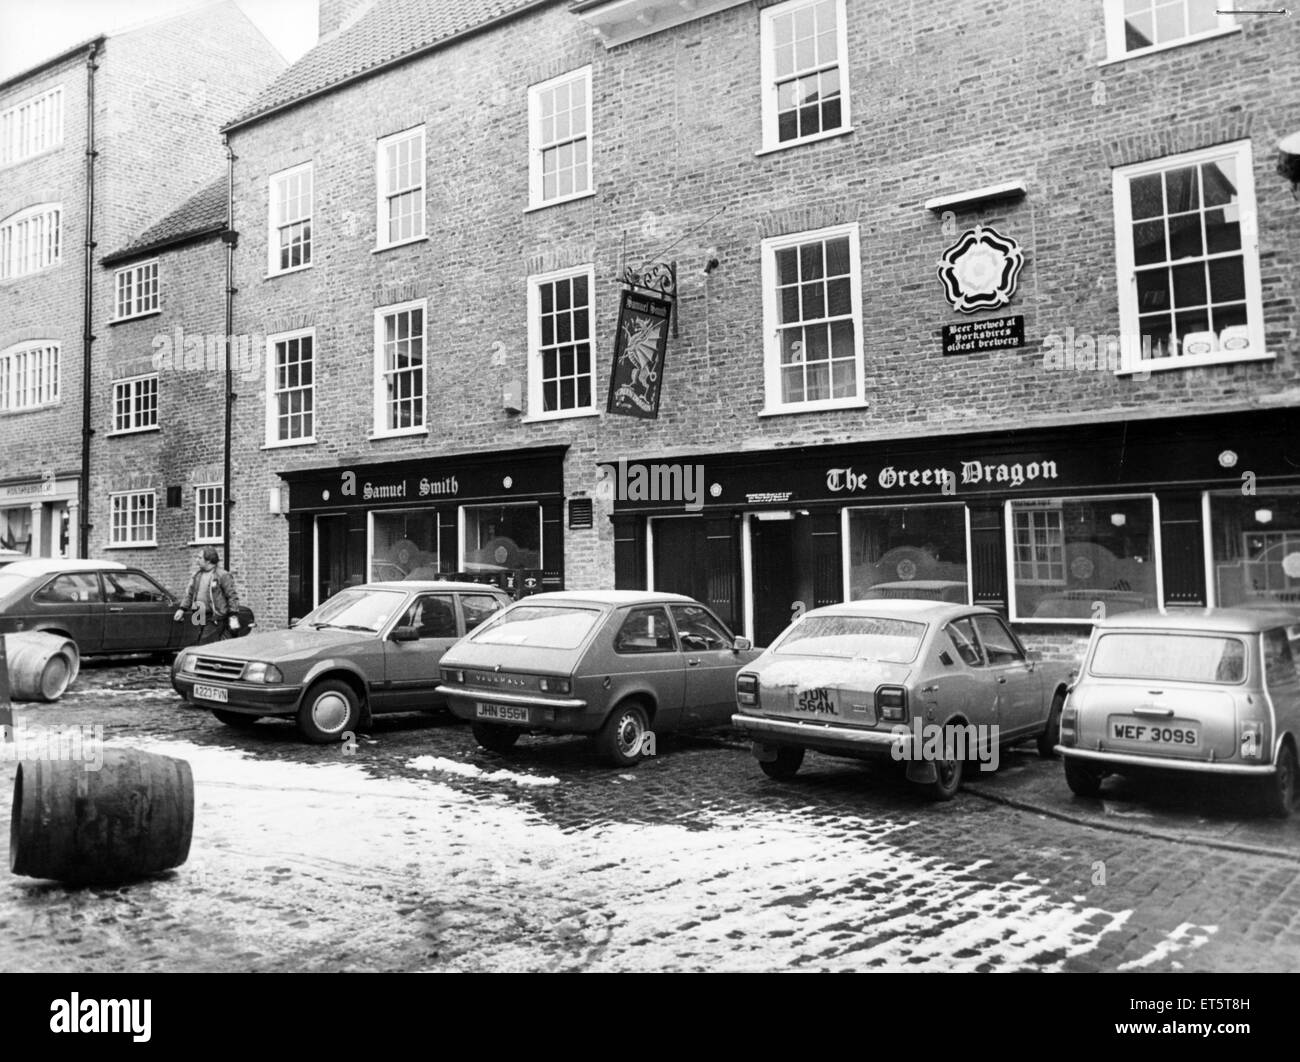 The Green Dragon Yard Georgian Theatre, Stockton, originally opened 1766, reopened 29th April 1980. Pictured 24th January 1984. Stock Photo